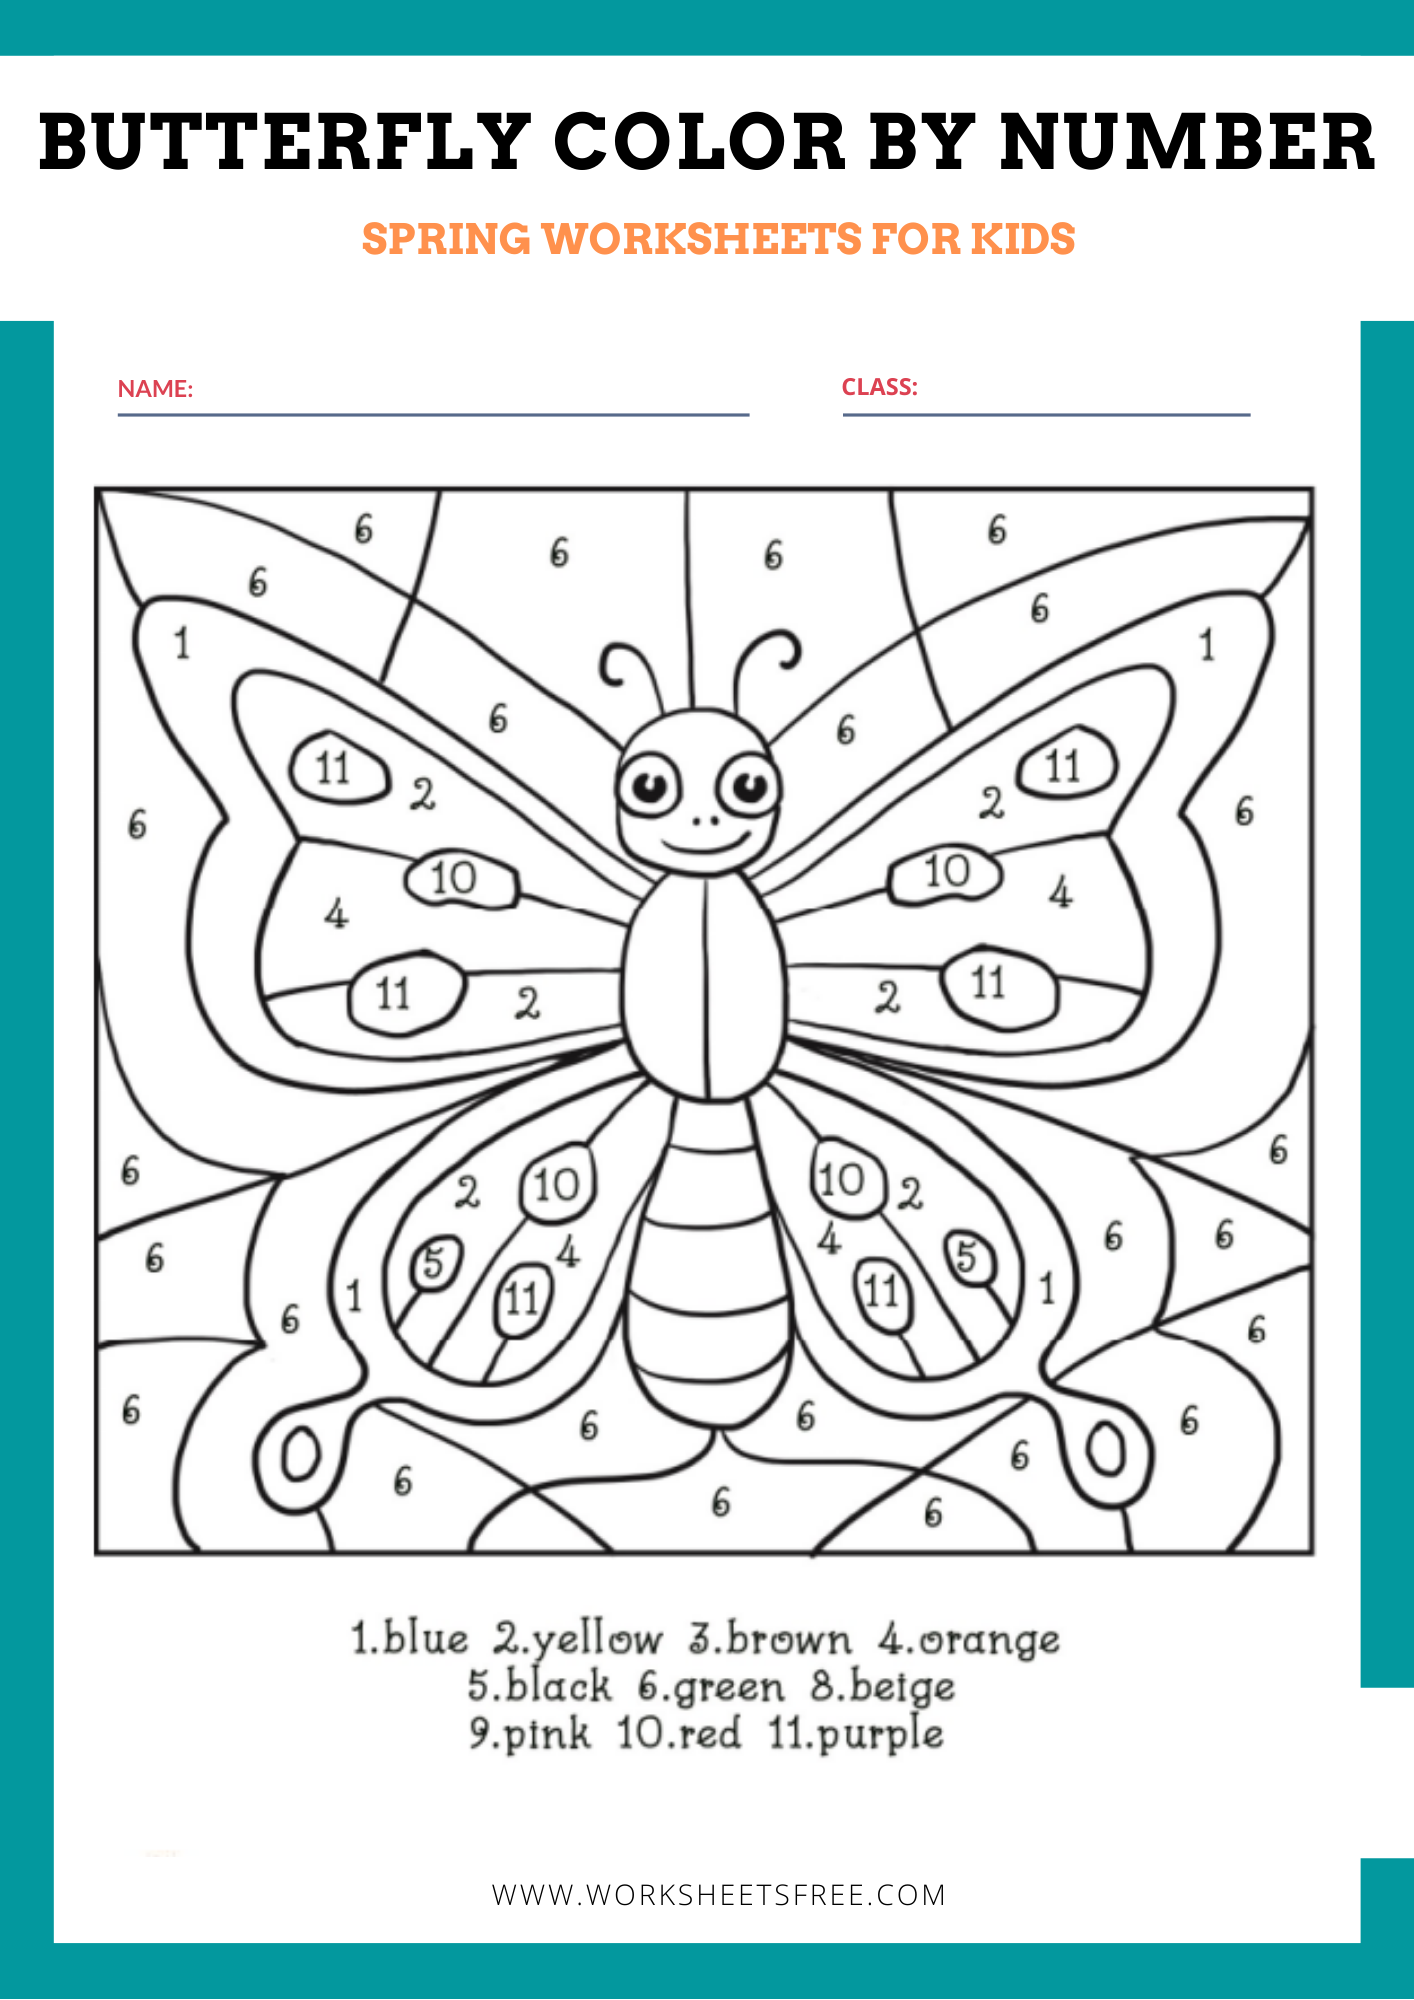 Butterfly Color by Number | Worksheets Free